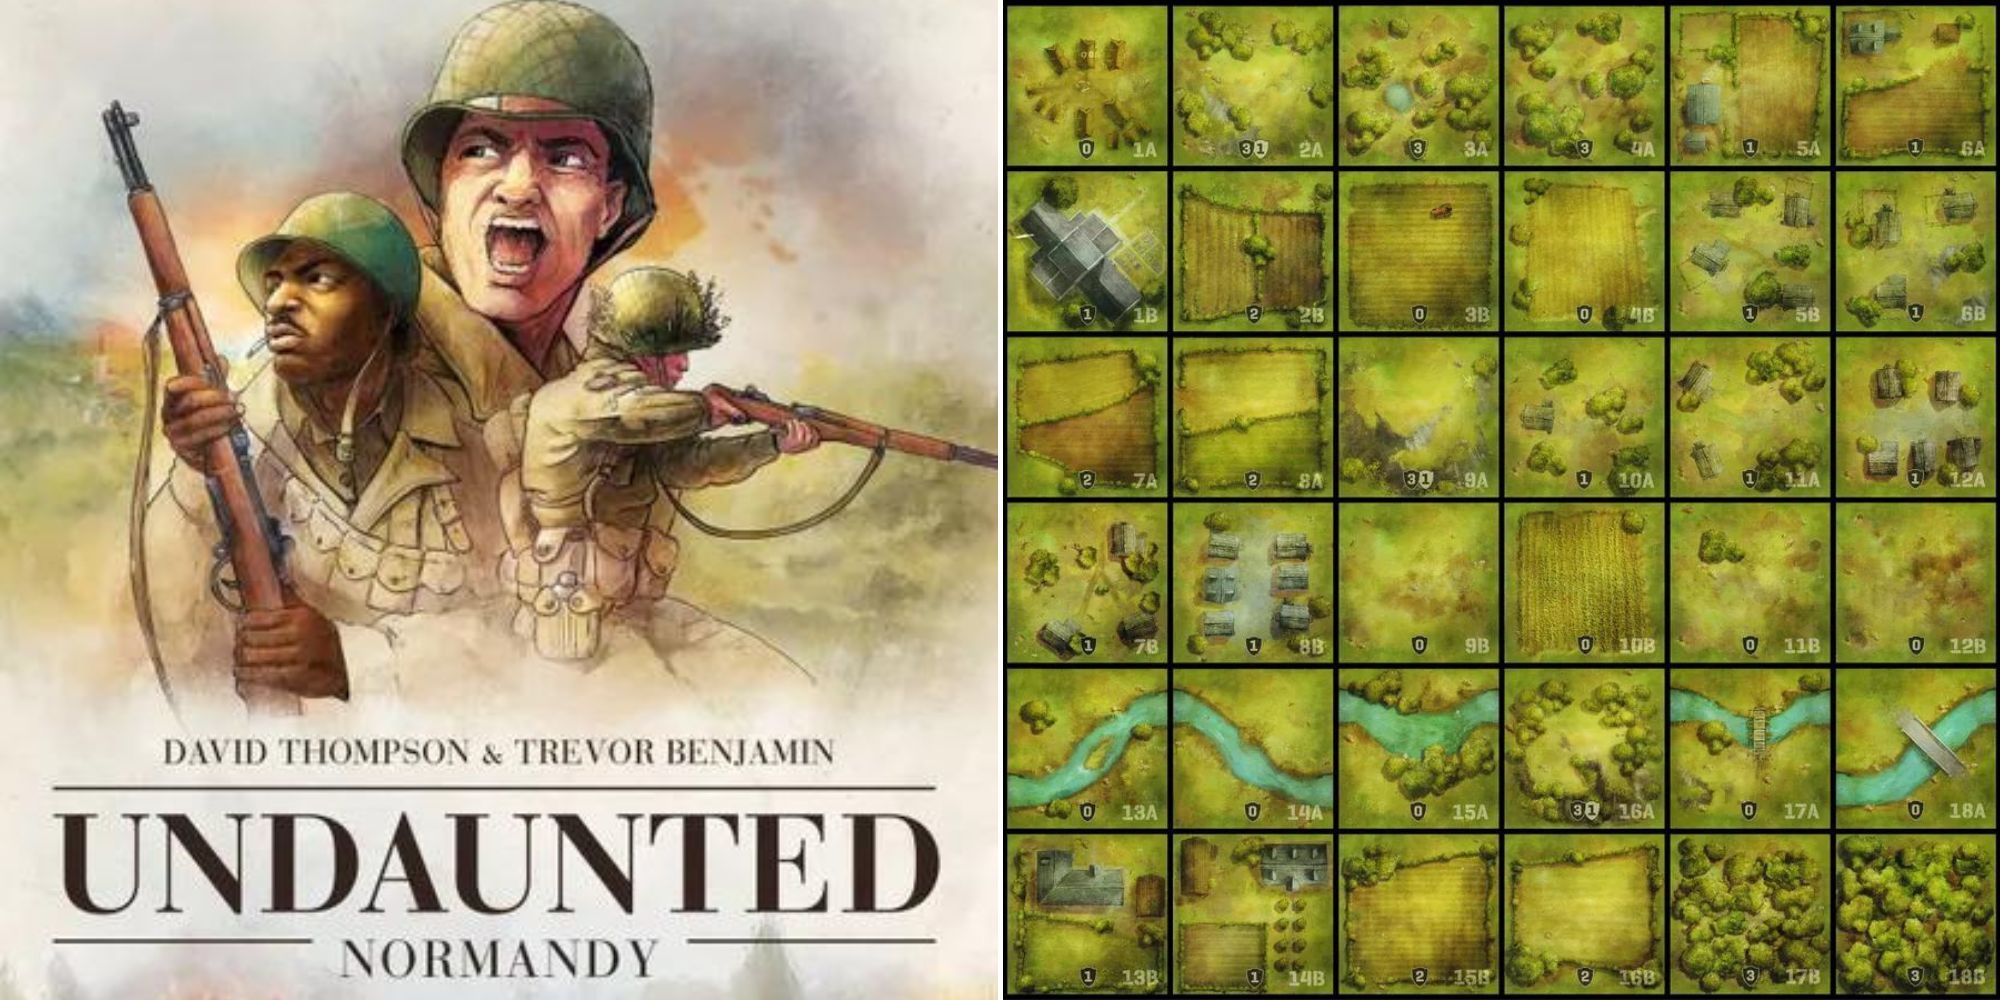 Undaunted normandy Board Game Box - The Land Tiles